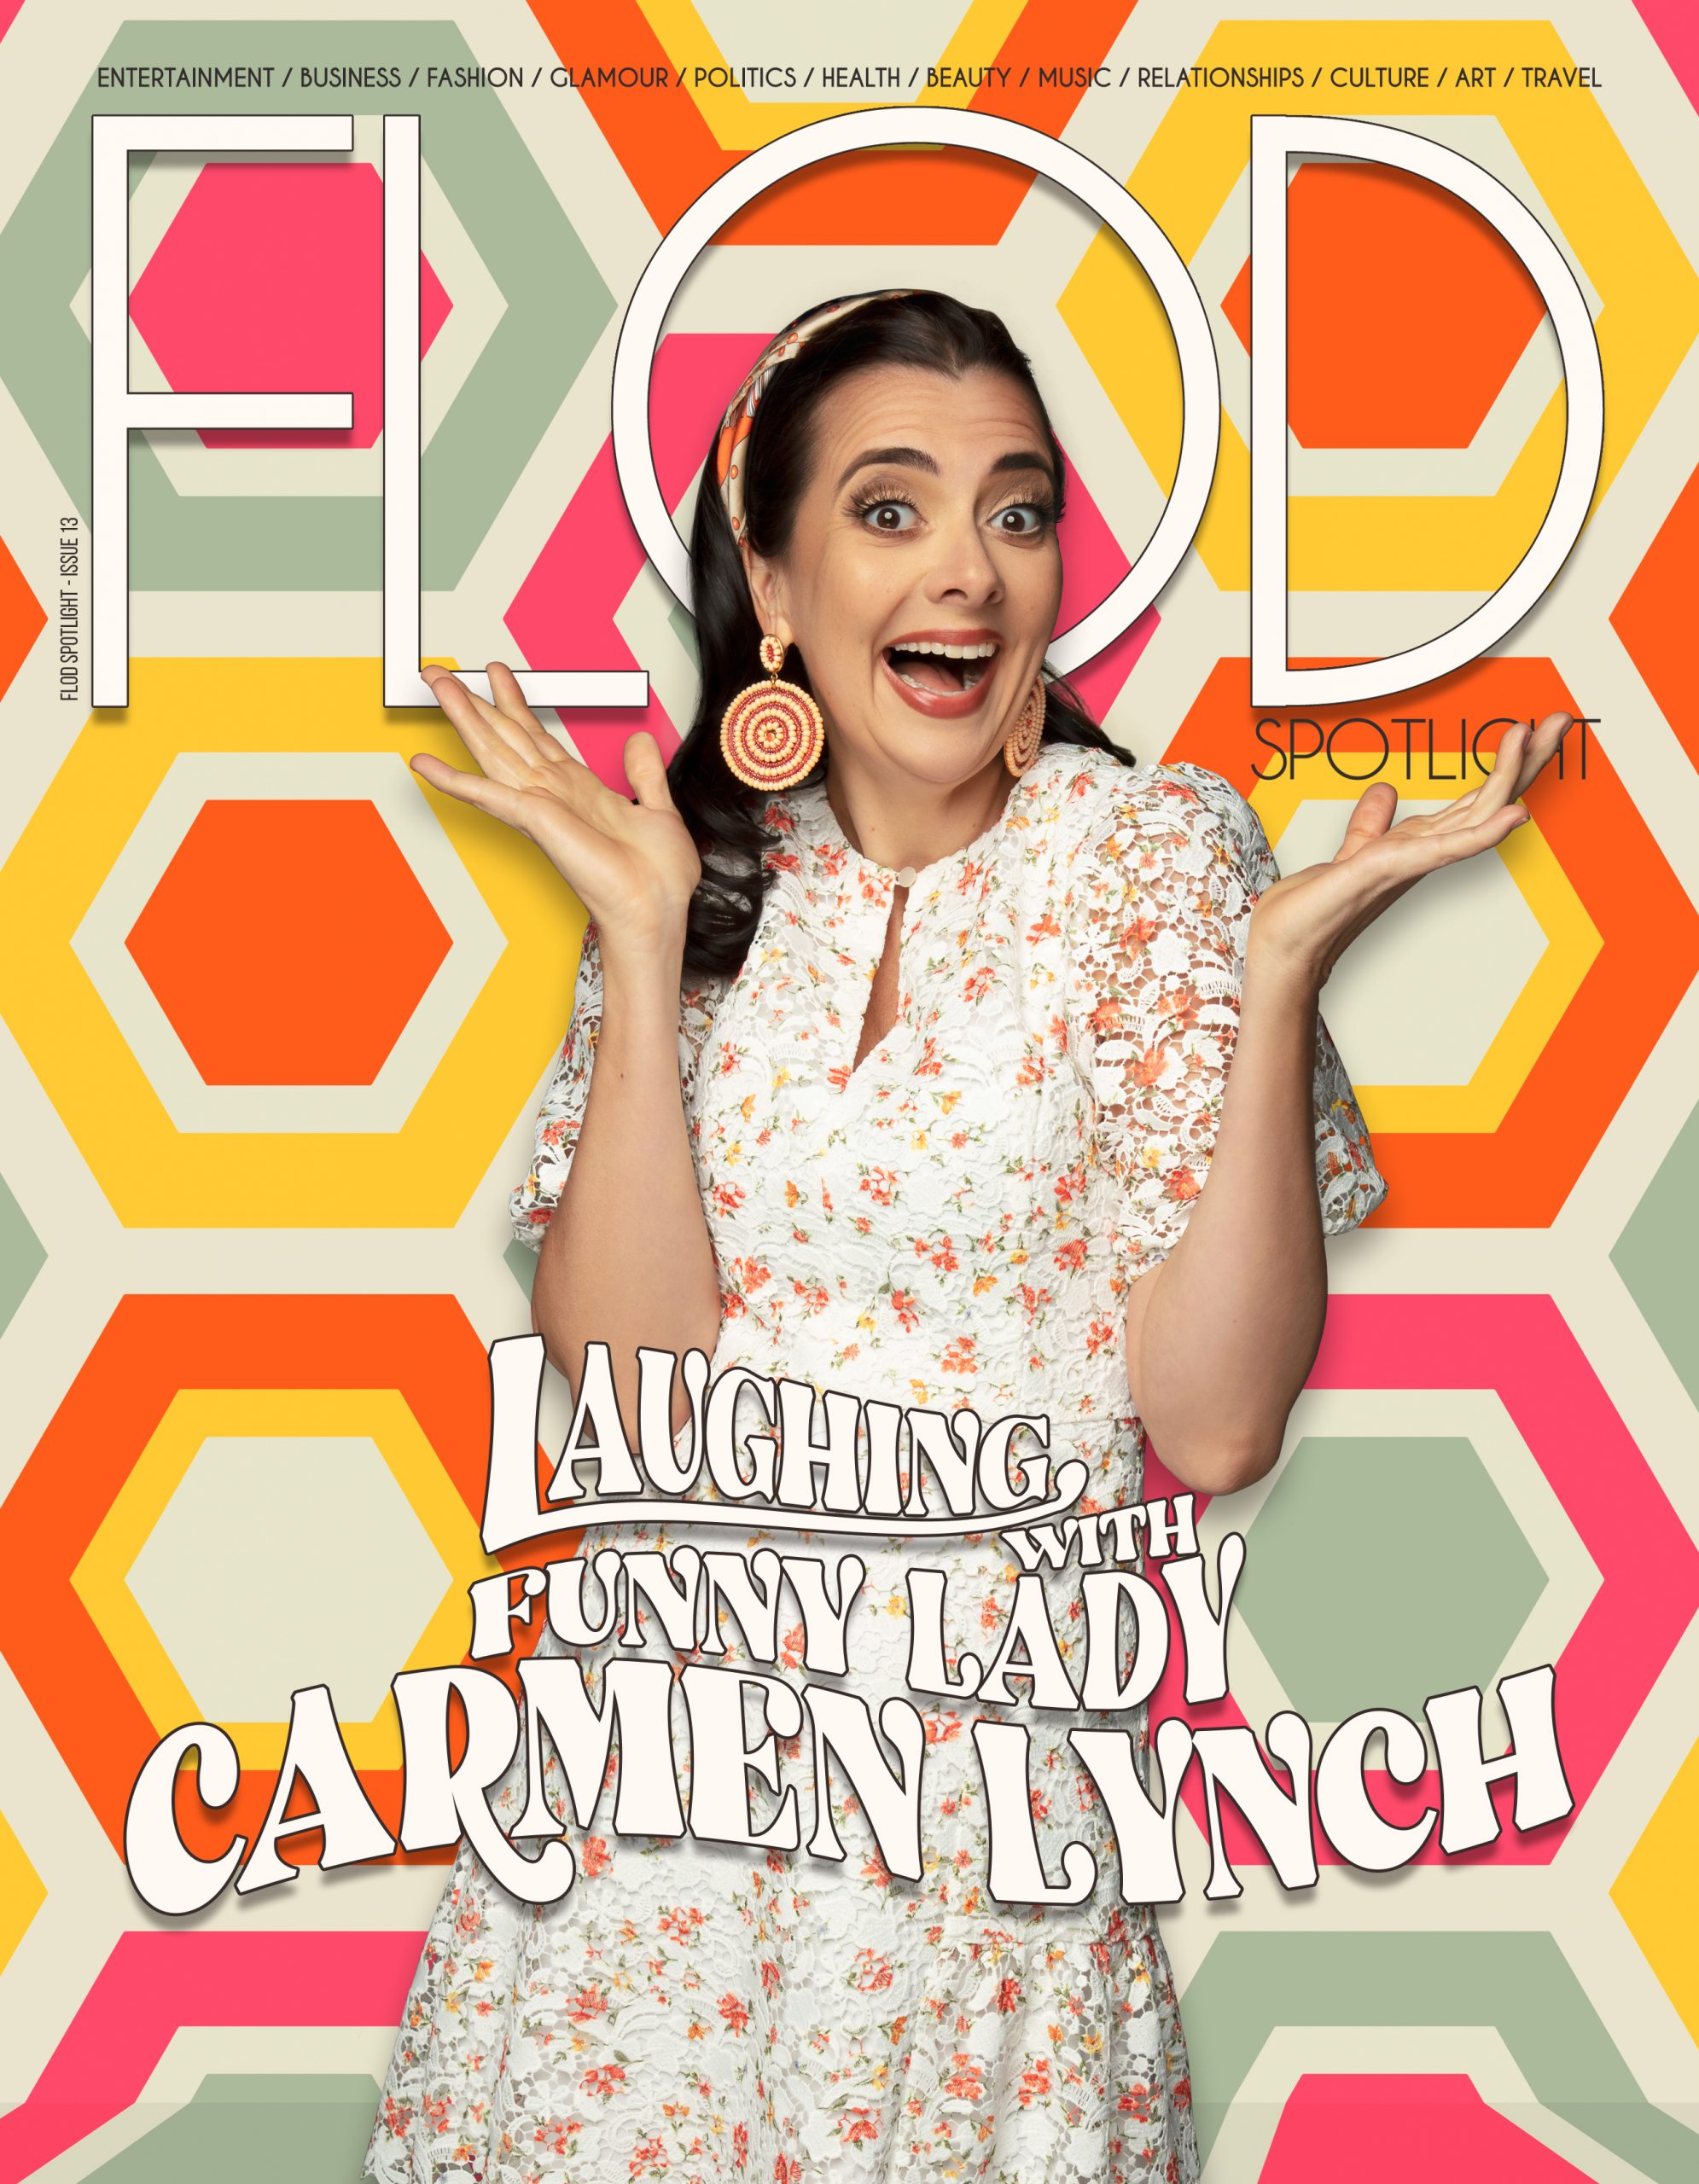 Issue 13 – Laughing with Funny Lady Carmen Lynch